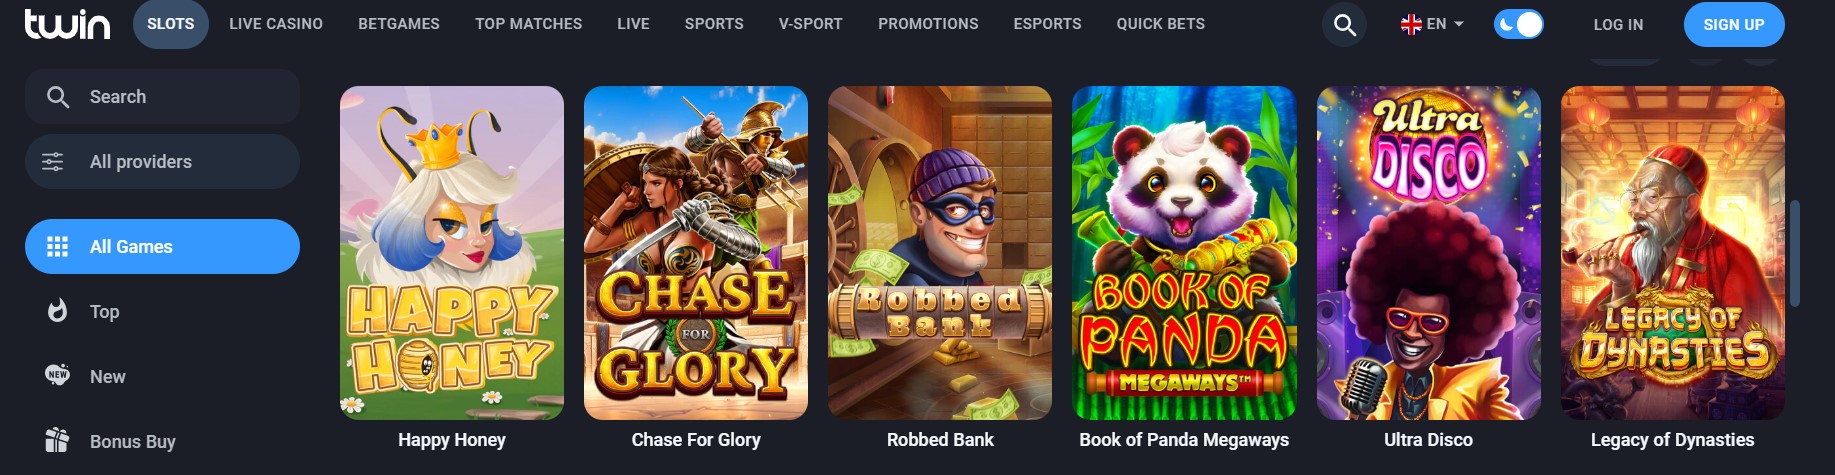 popular games at twin casino